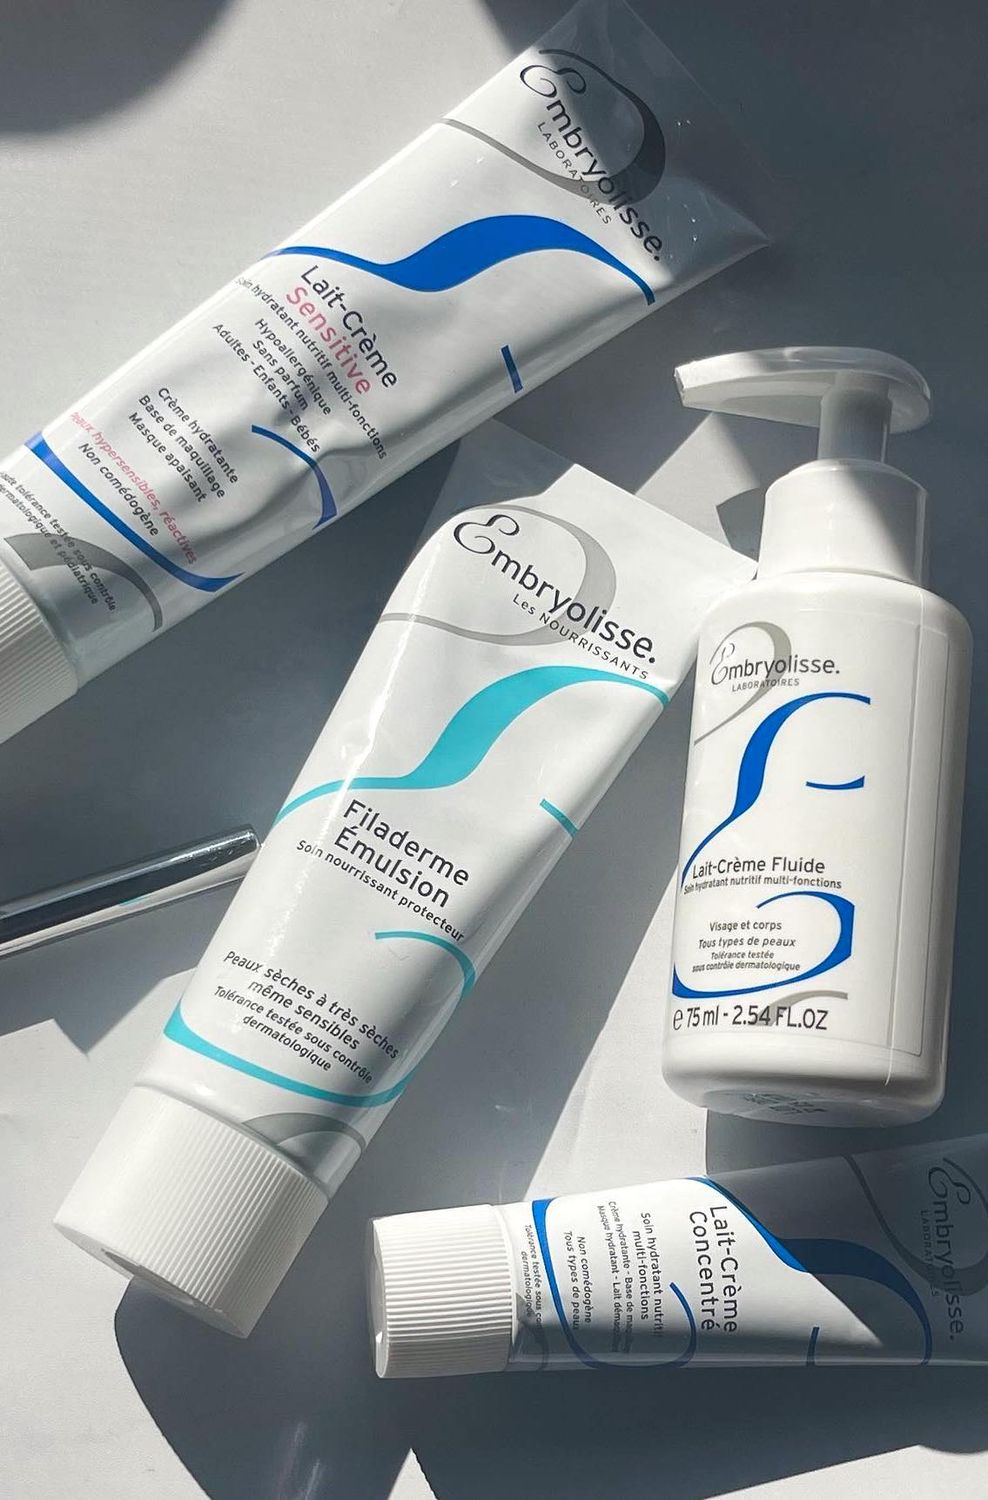 7 Best Embryolisse Skincare Products